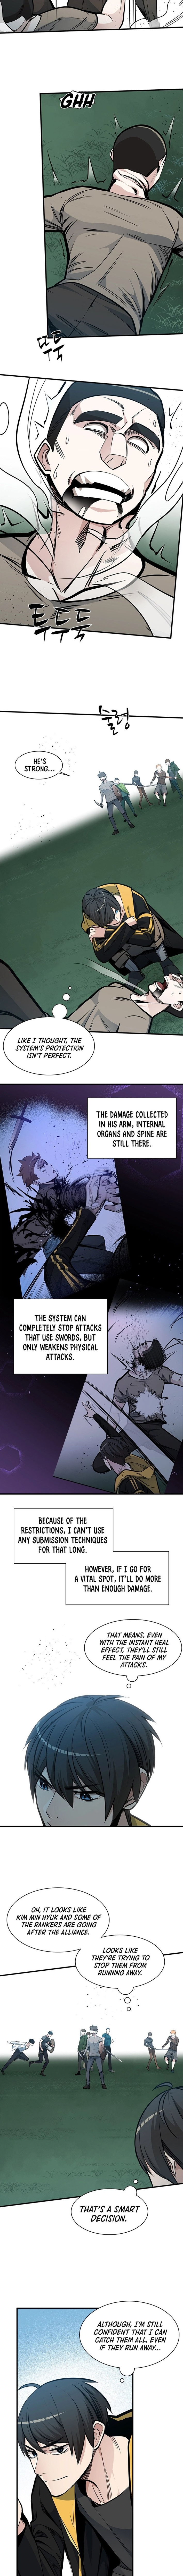 the-tutorial-is-too-hard-chap-33-8